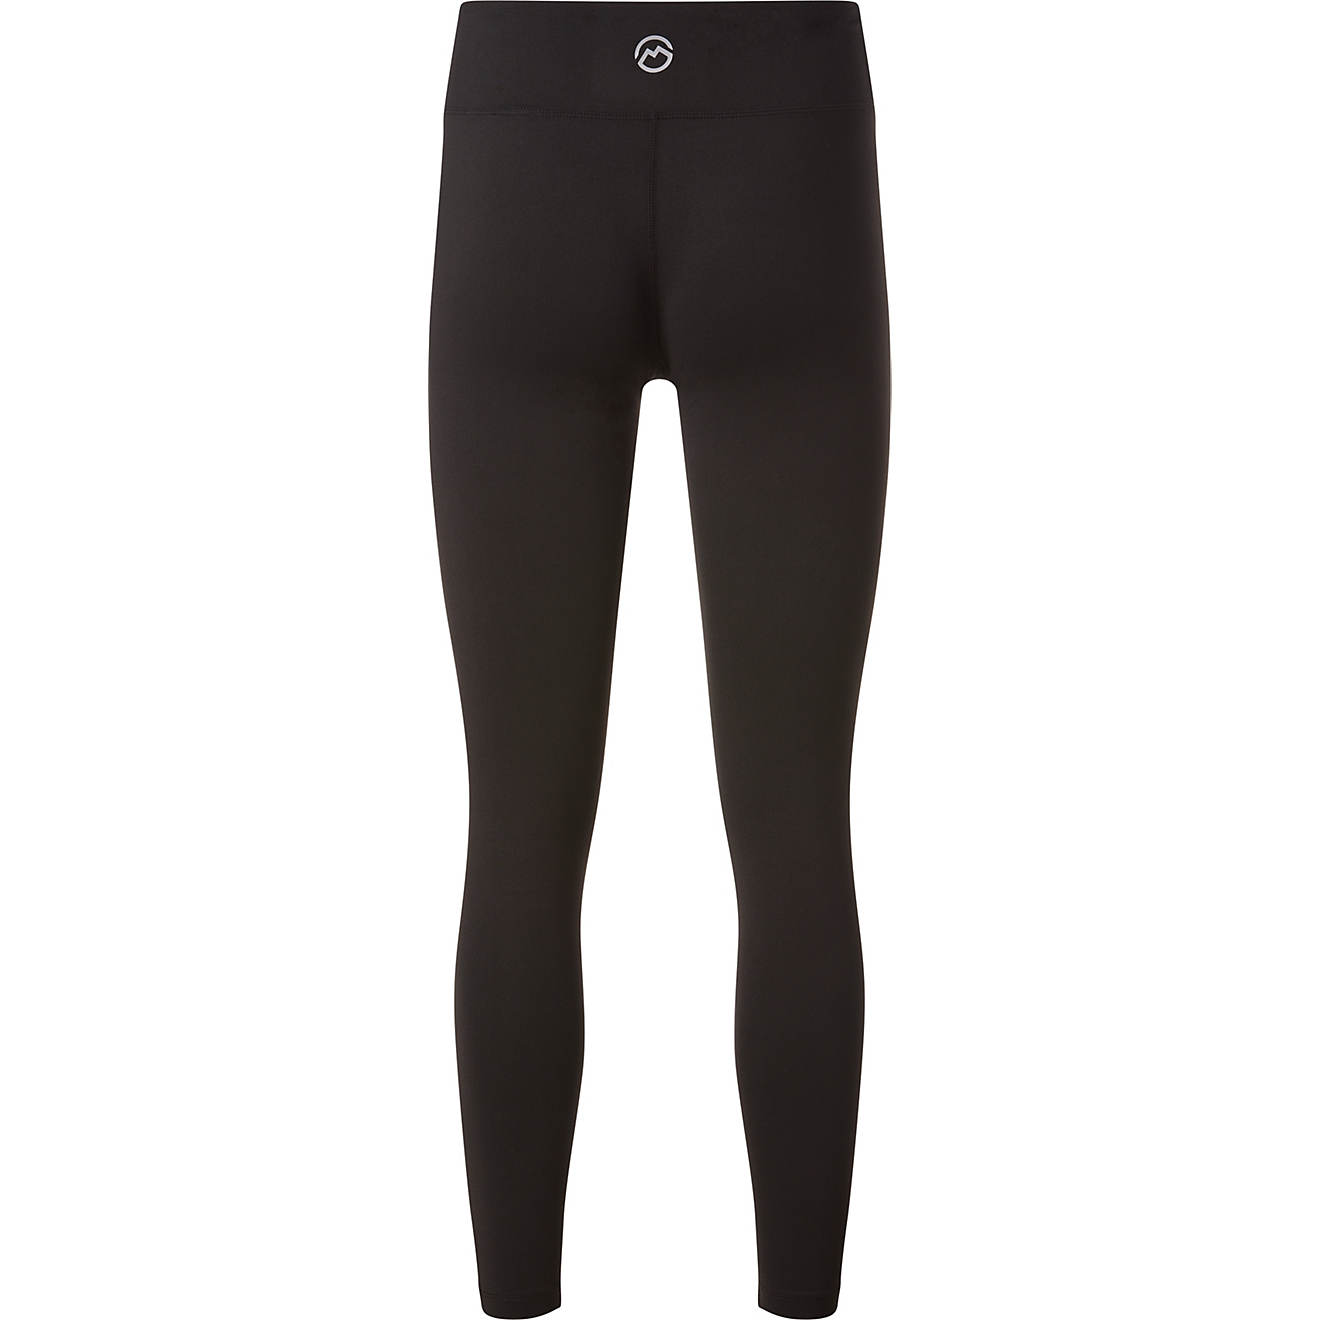 Magellan Outdoors Women's Baselayer 2.0 Thermal Stretch Pants | Academy